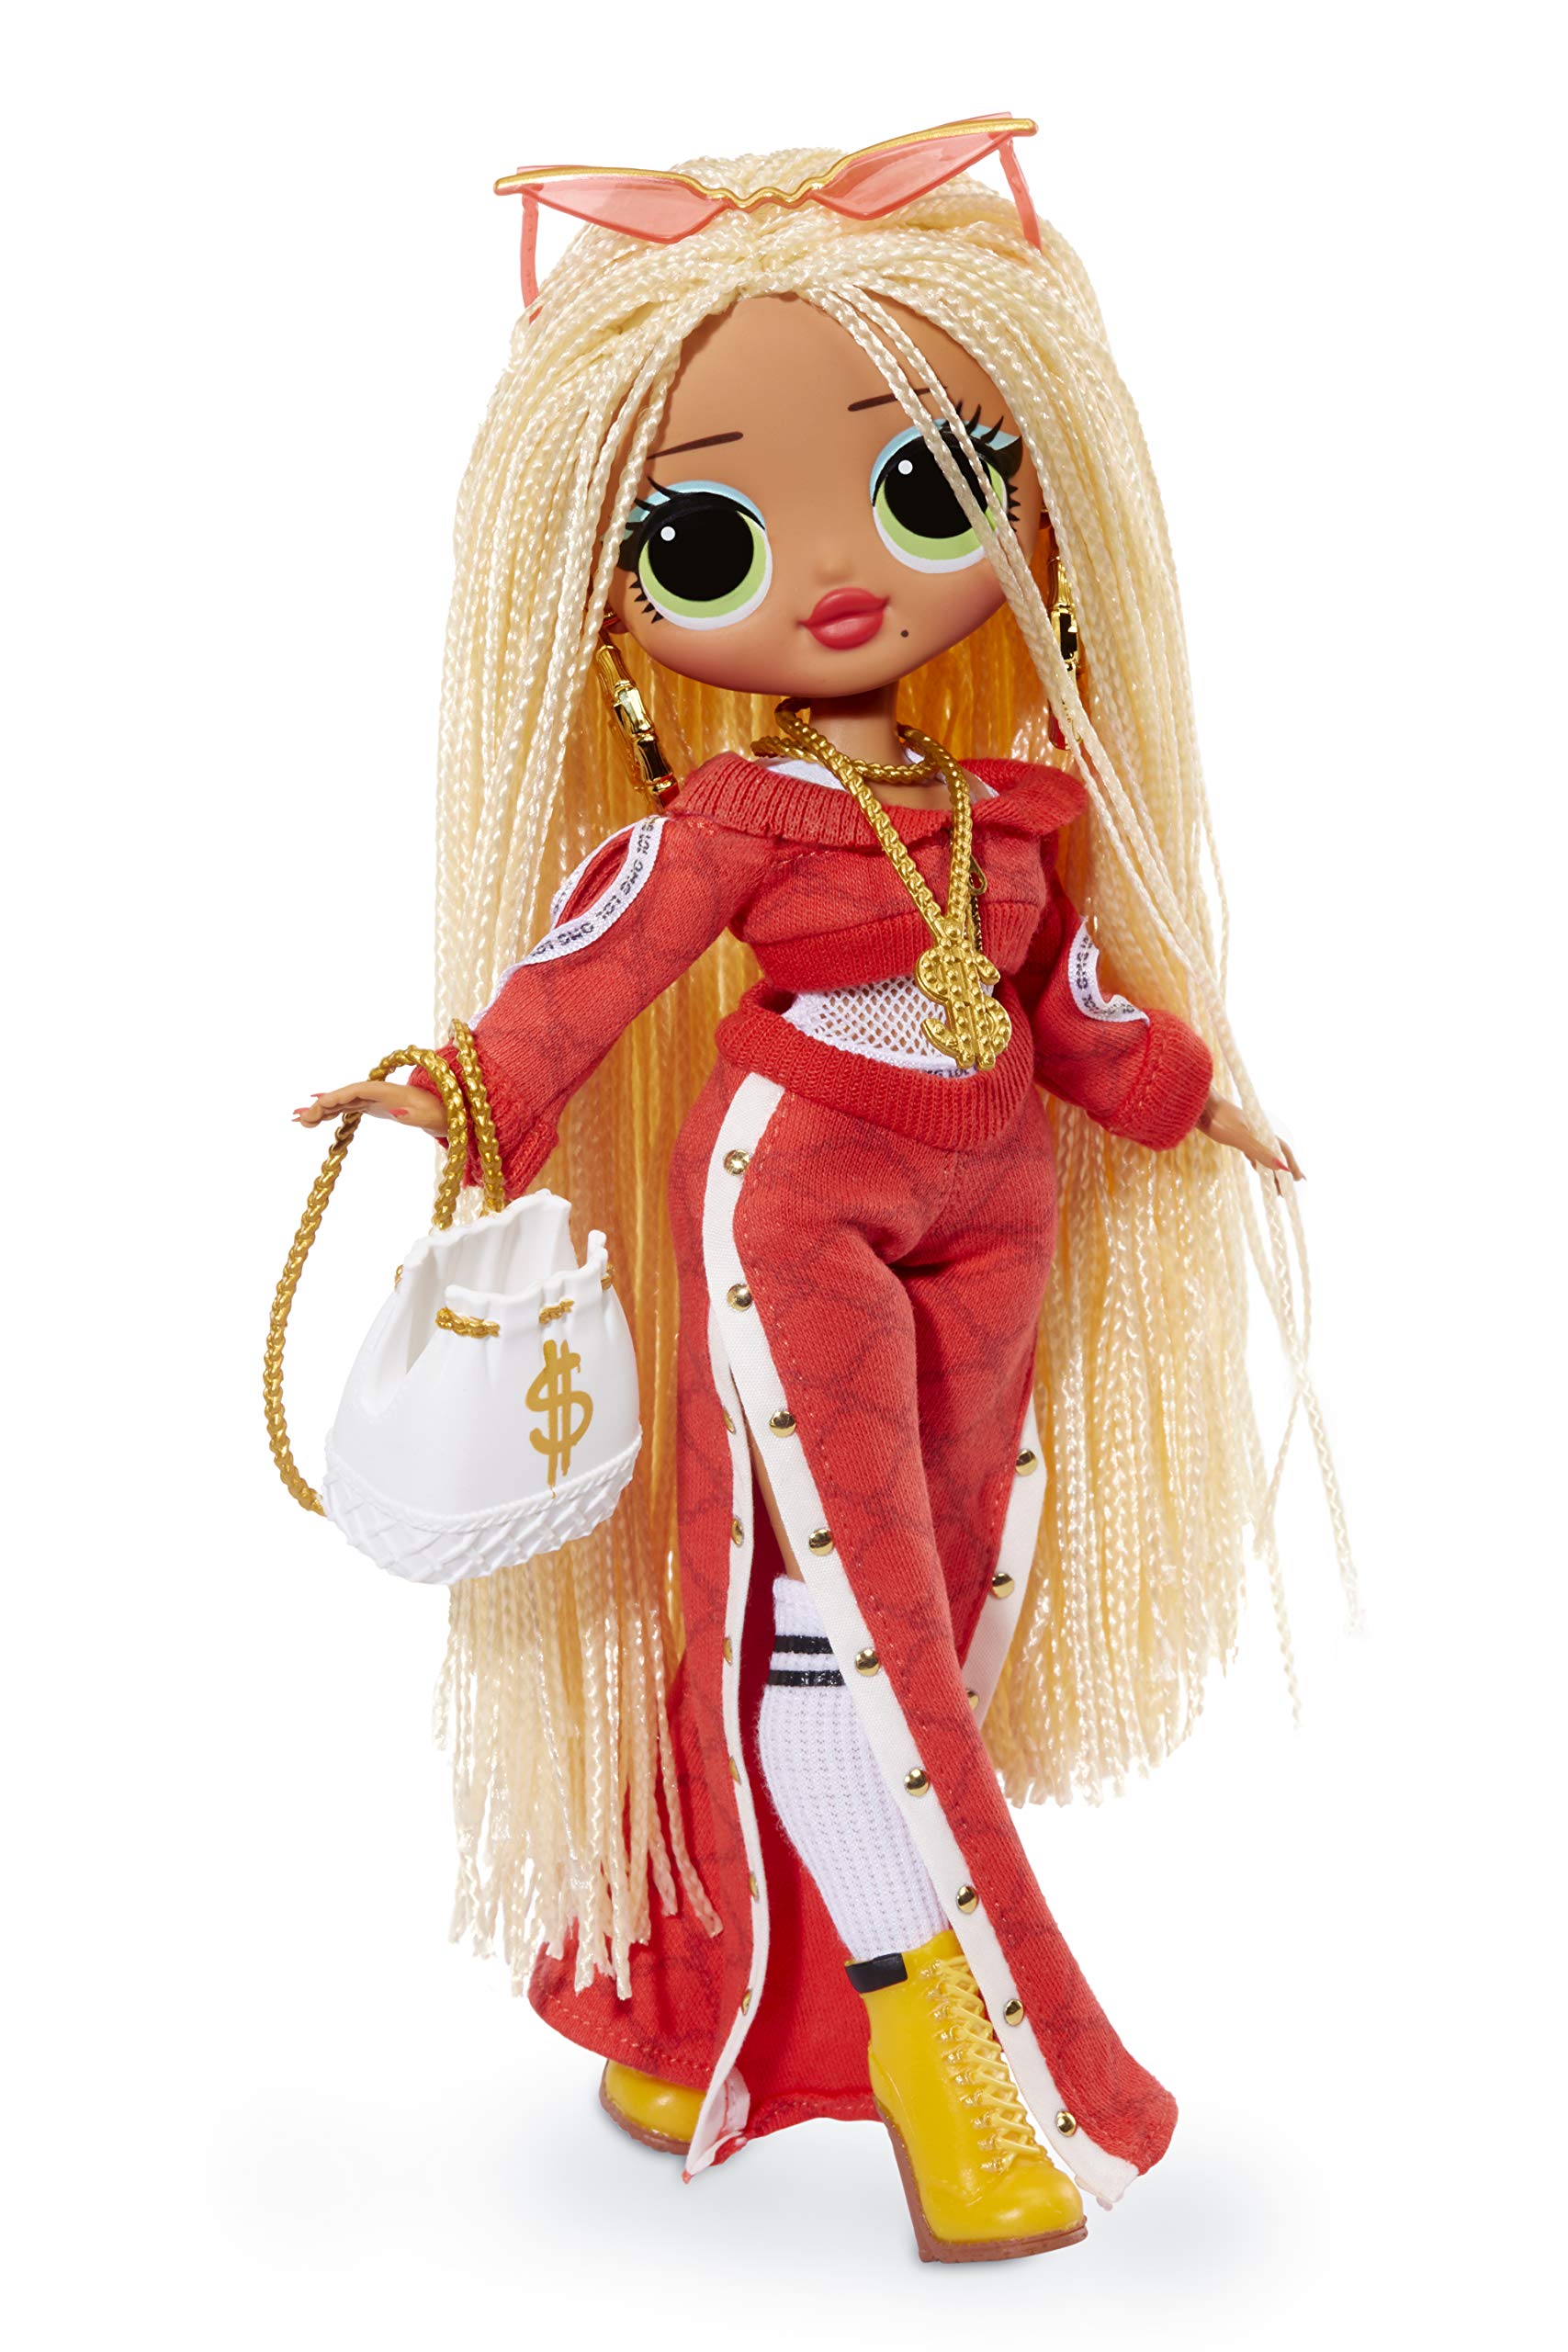 Where To Buy New Lol Surprise Omg Fashion Dolls We Know The Answer